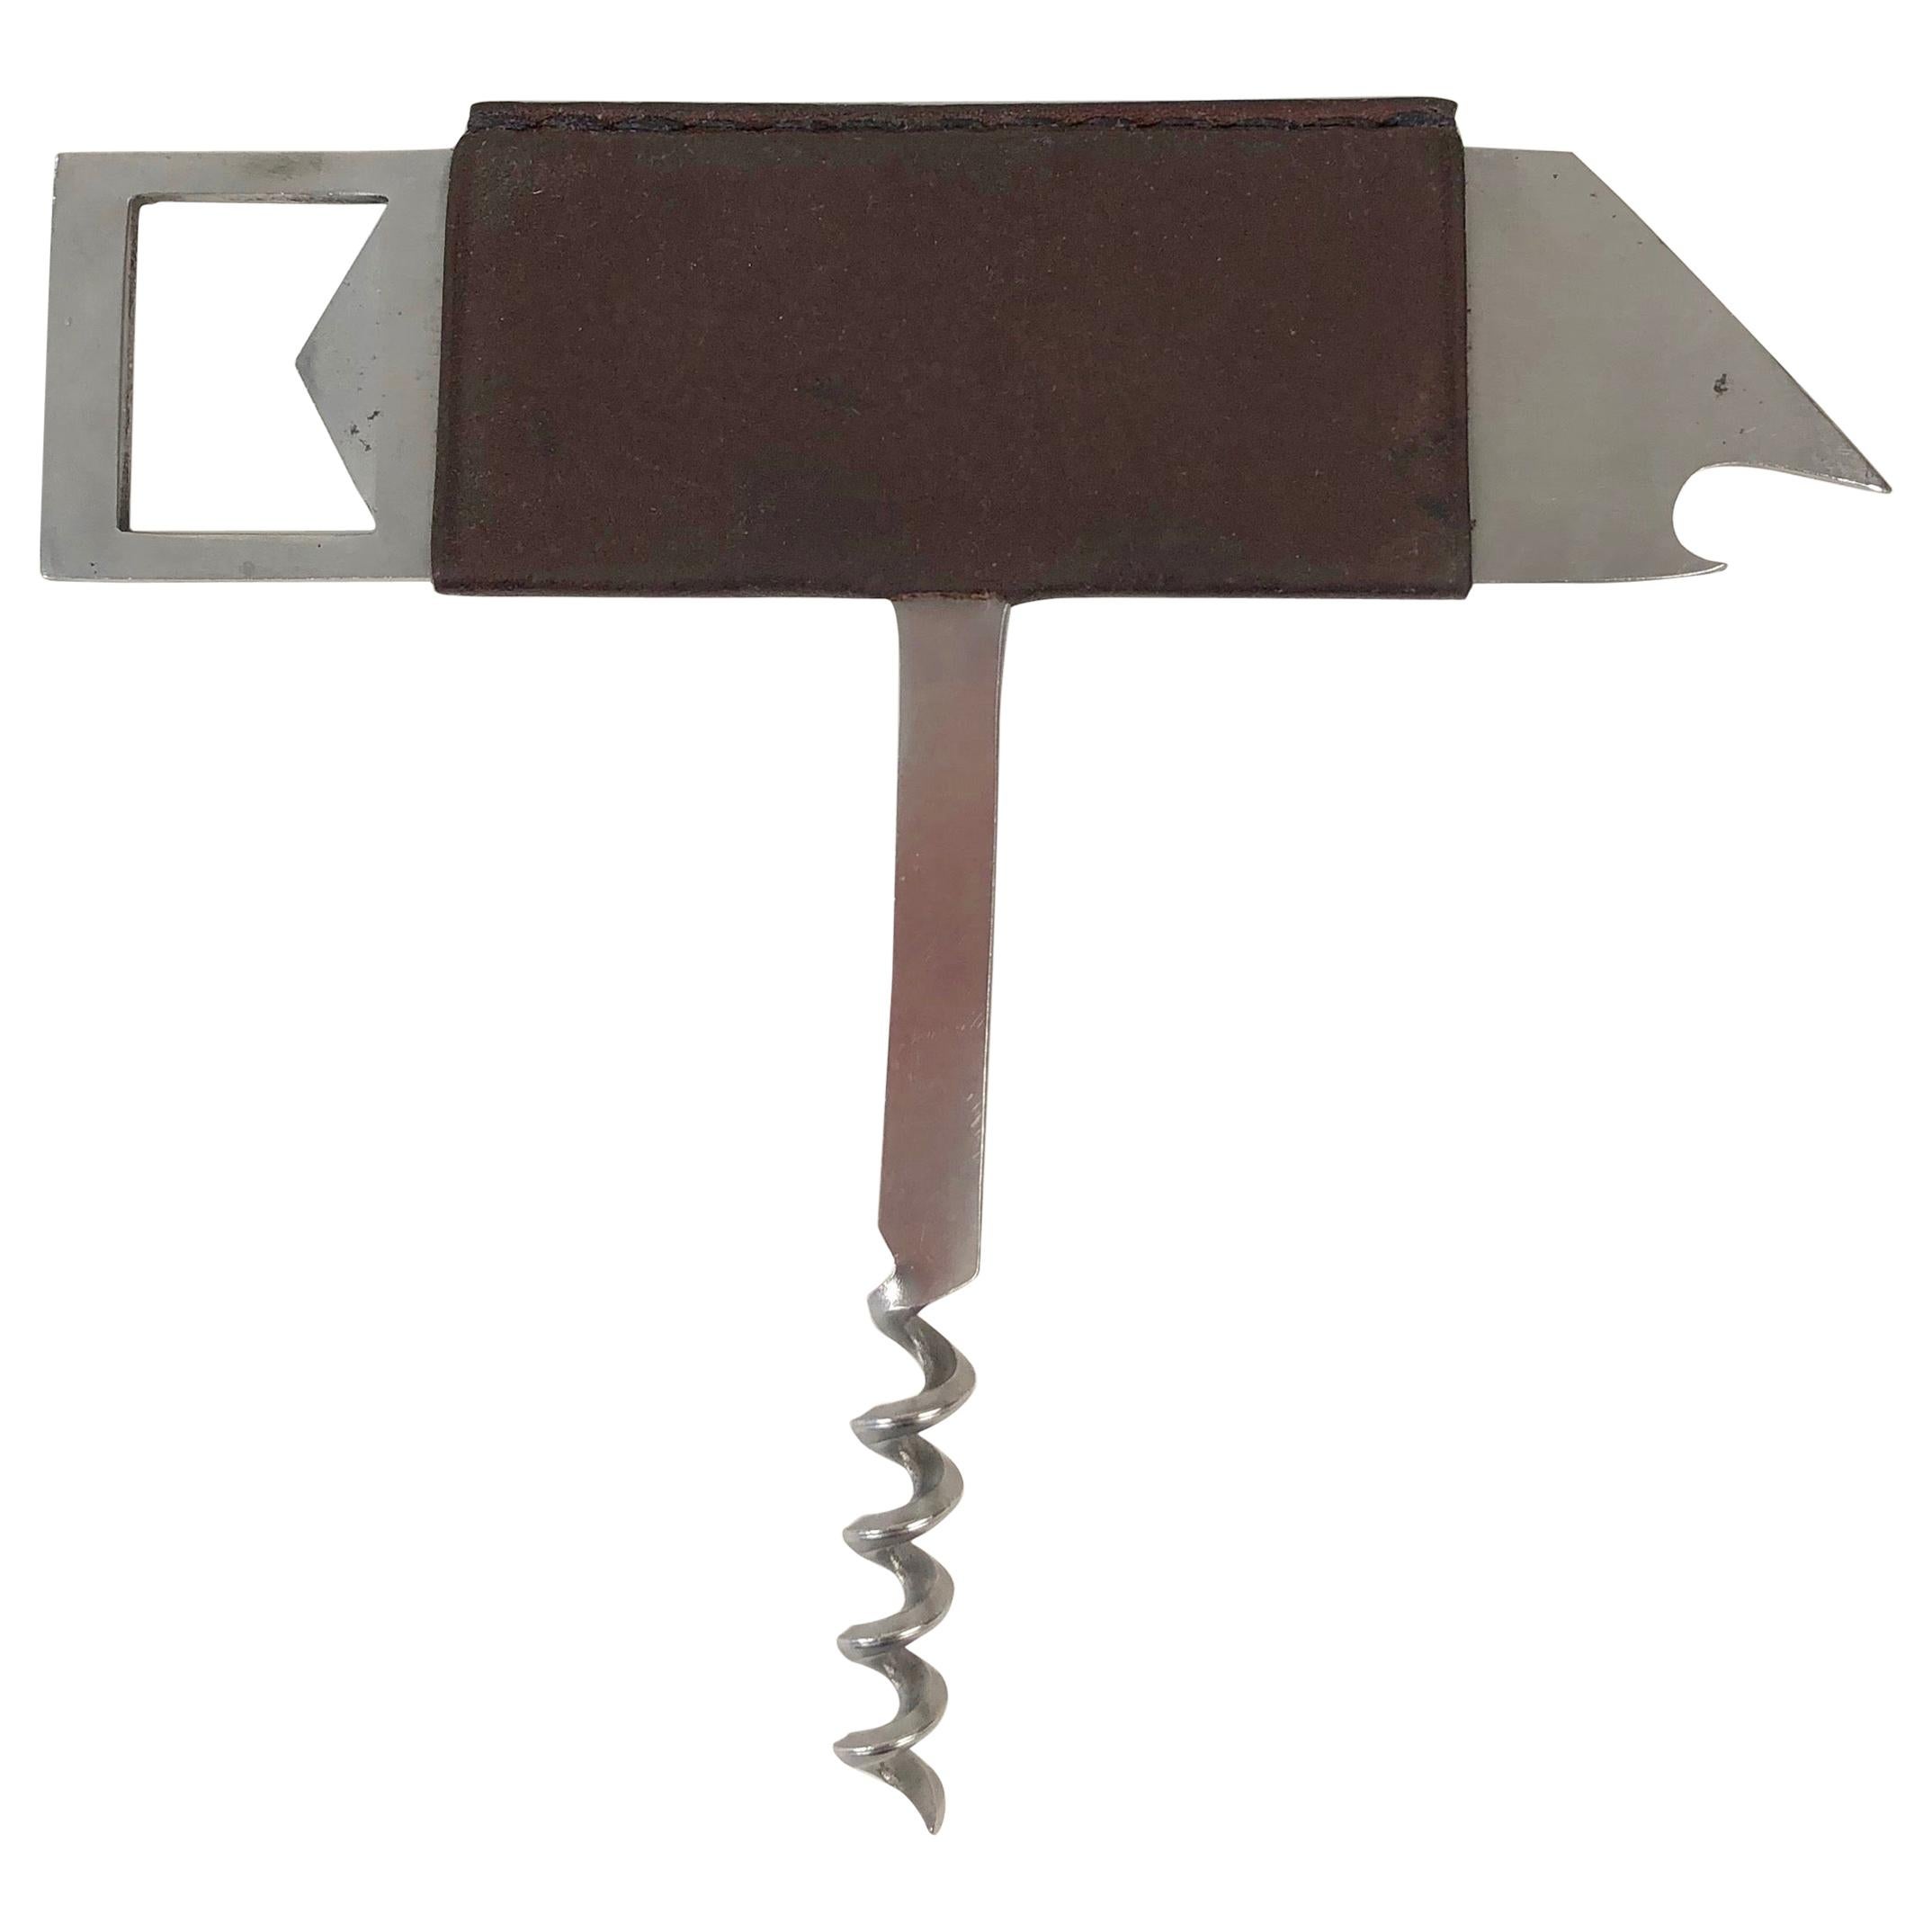 Carl Auböck, Bird, Bottle Opener in Stainless Steel and Leather, Amboss, 1960